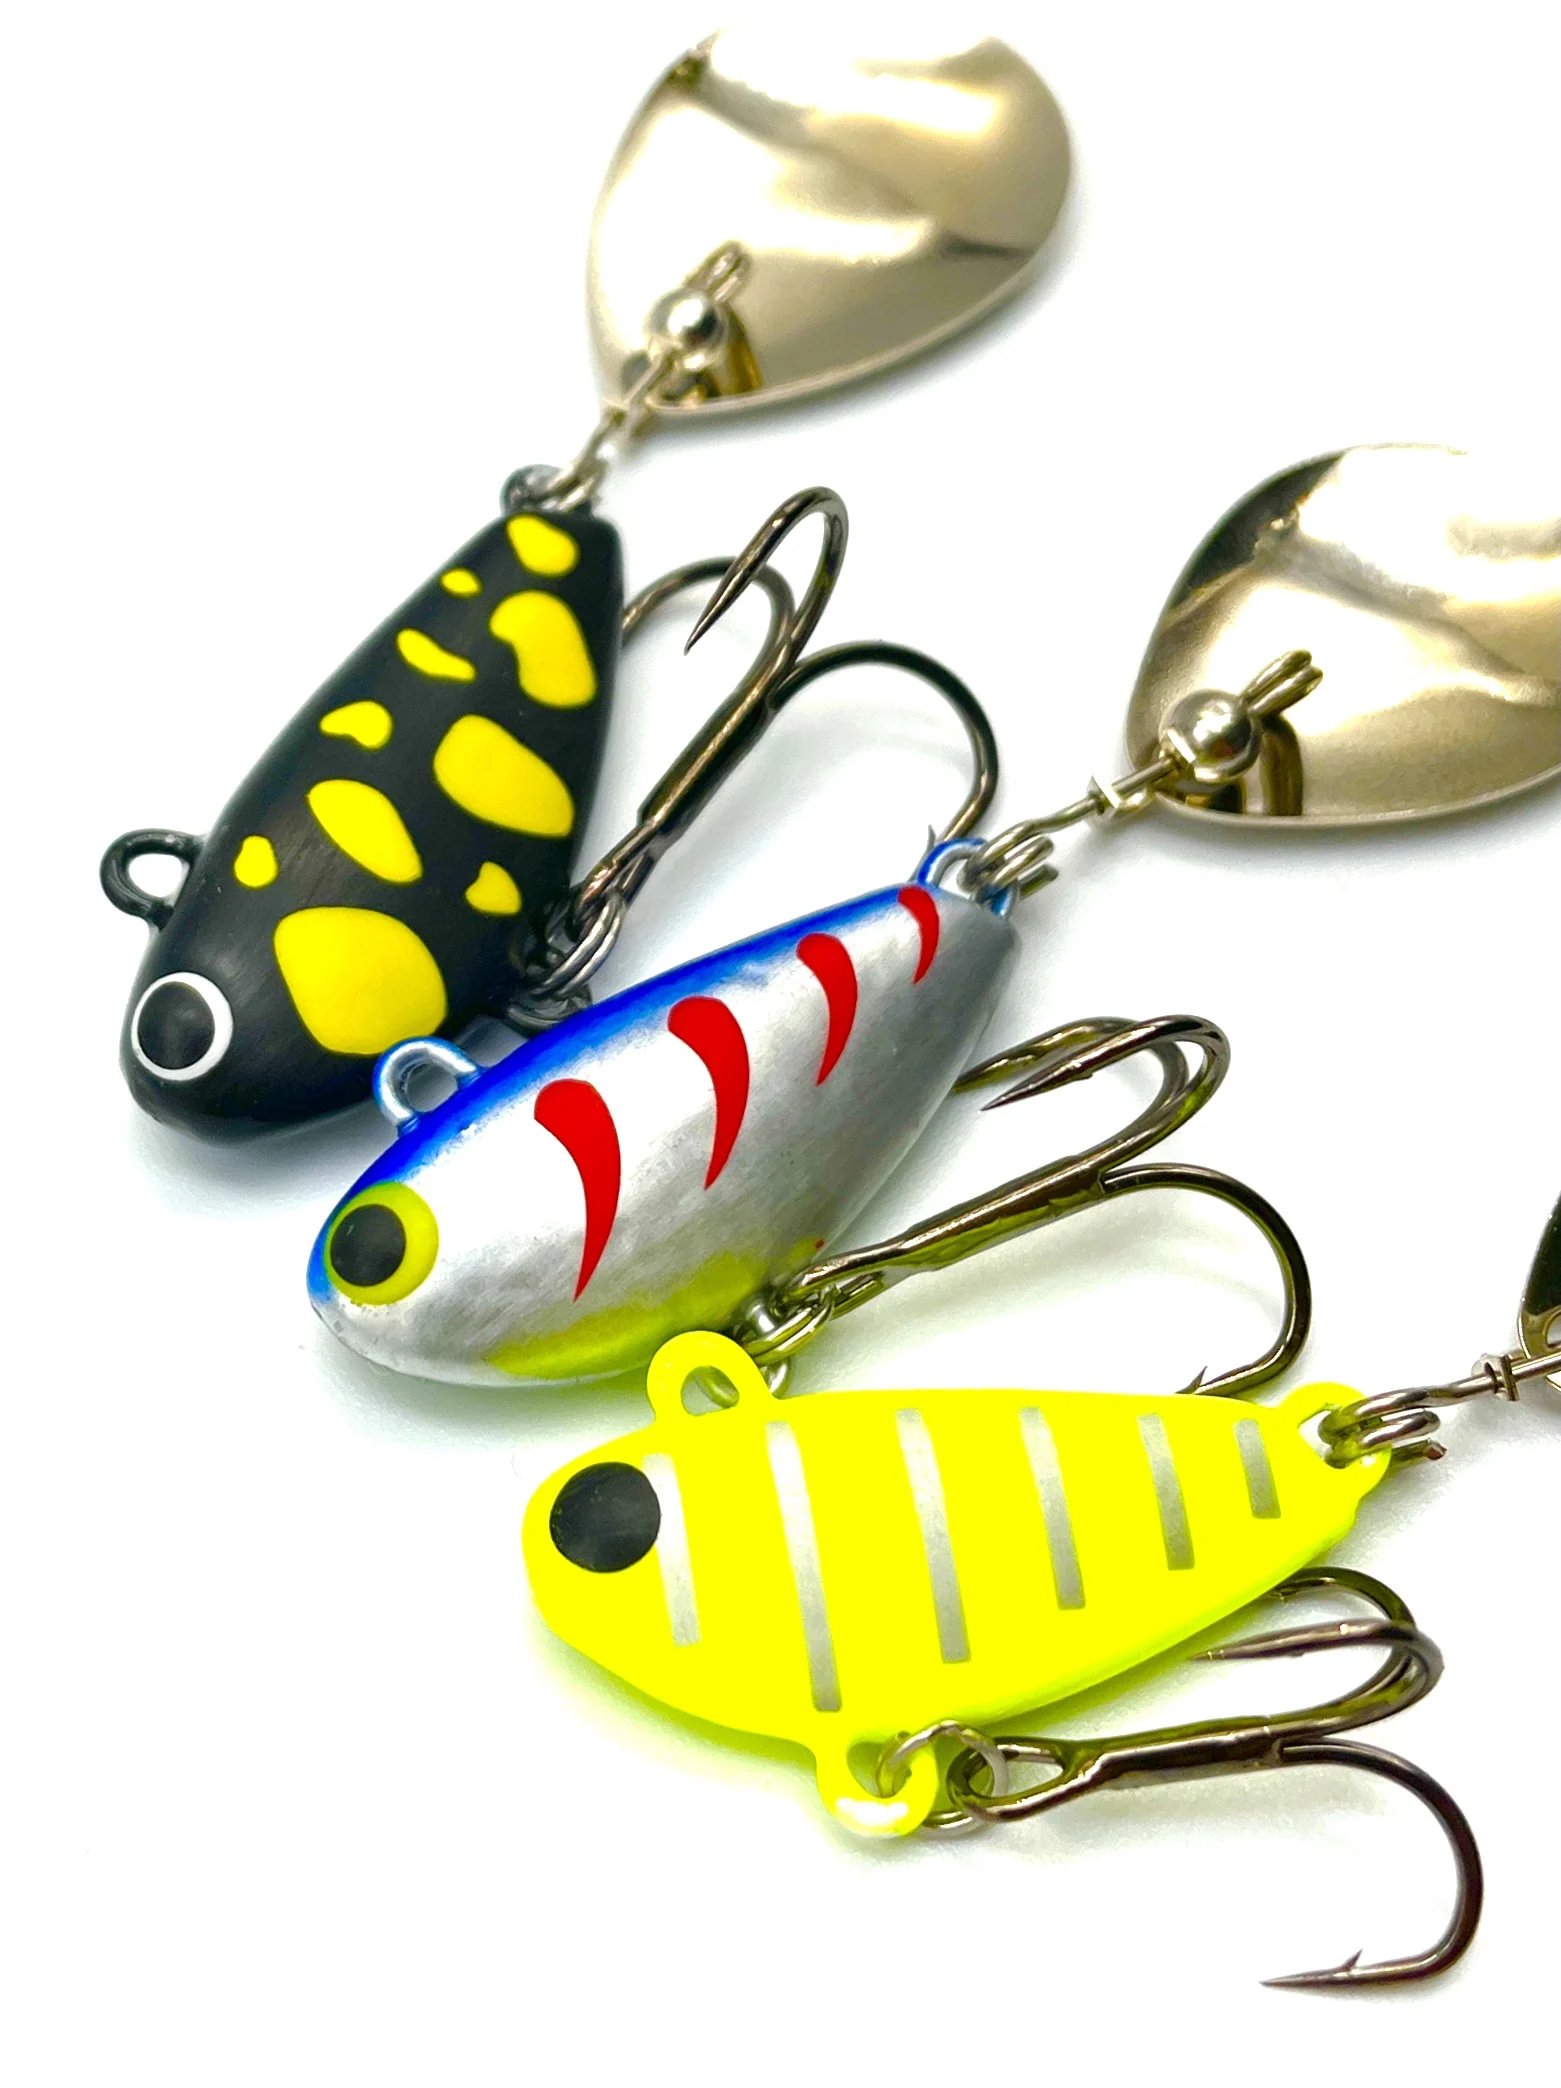 Tail-spinner BULLET UF studio fishing lures baits for asp pike perch chub  fishing accessories